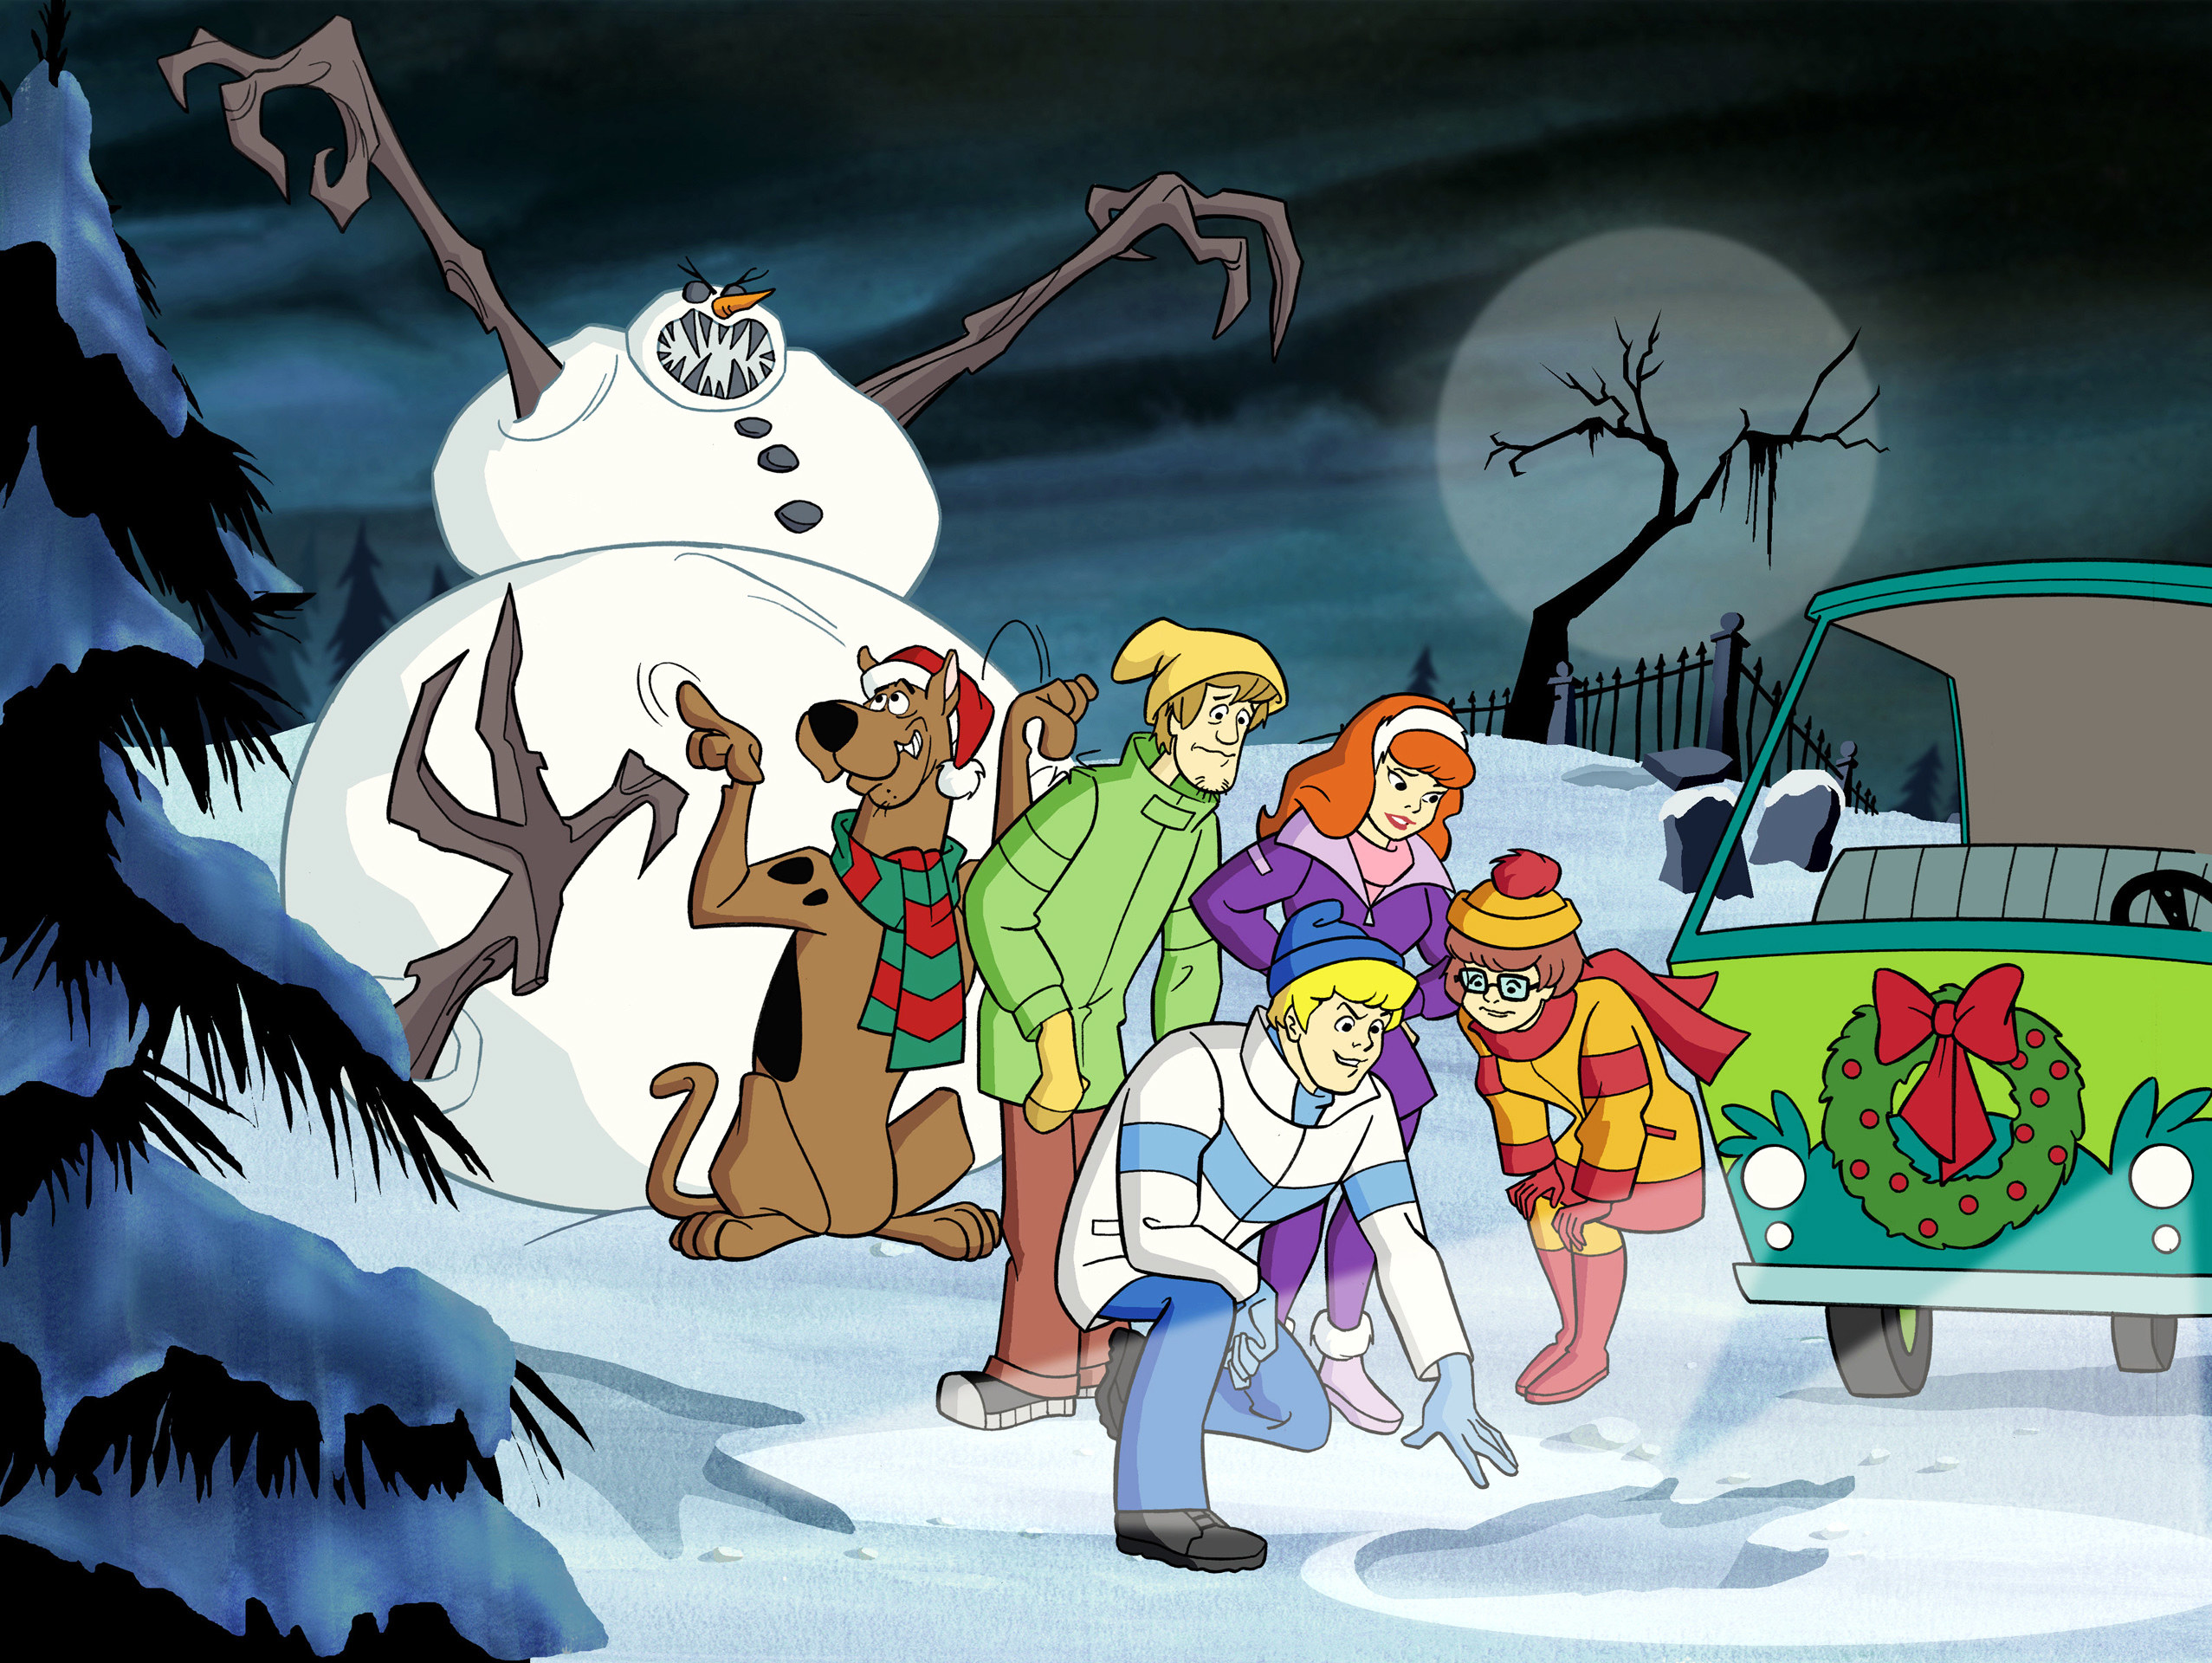 Scooby-Doo, Shaggy, Fred, Daphne and Velma in A Scooby-Doo Christmas